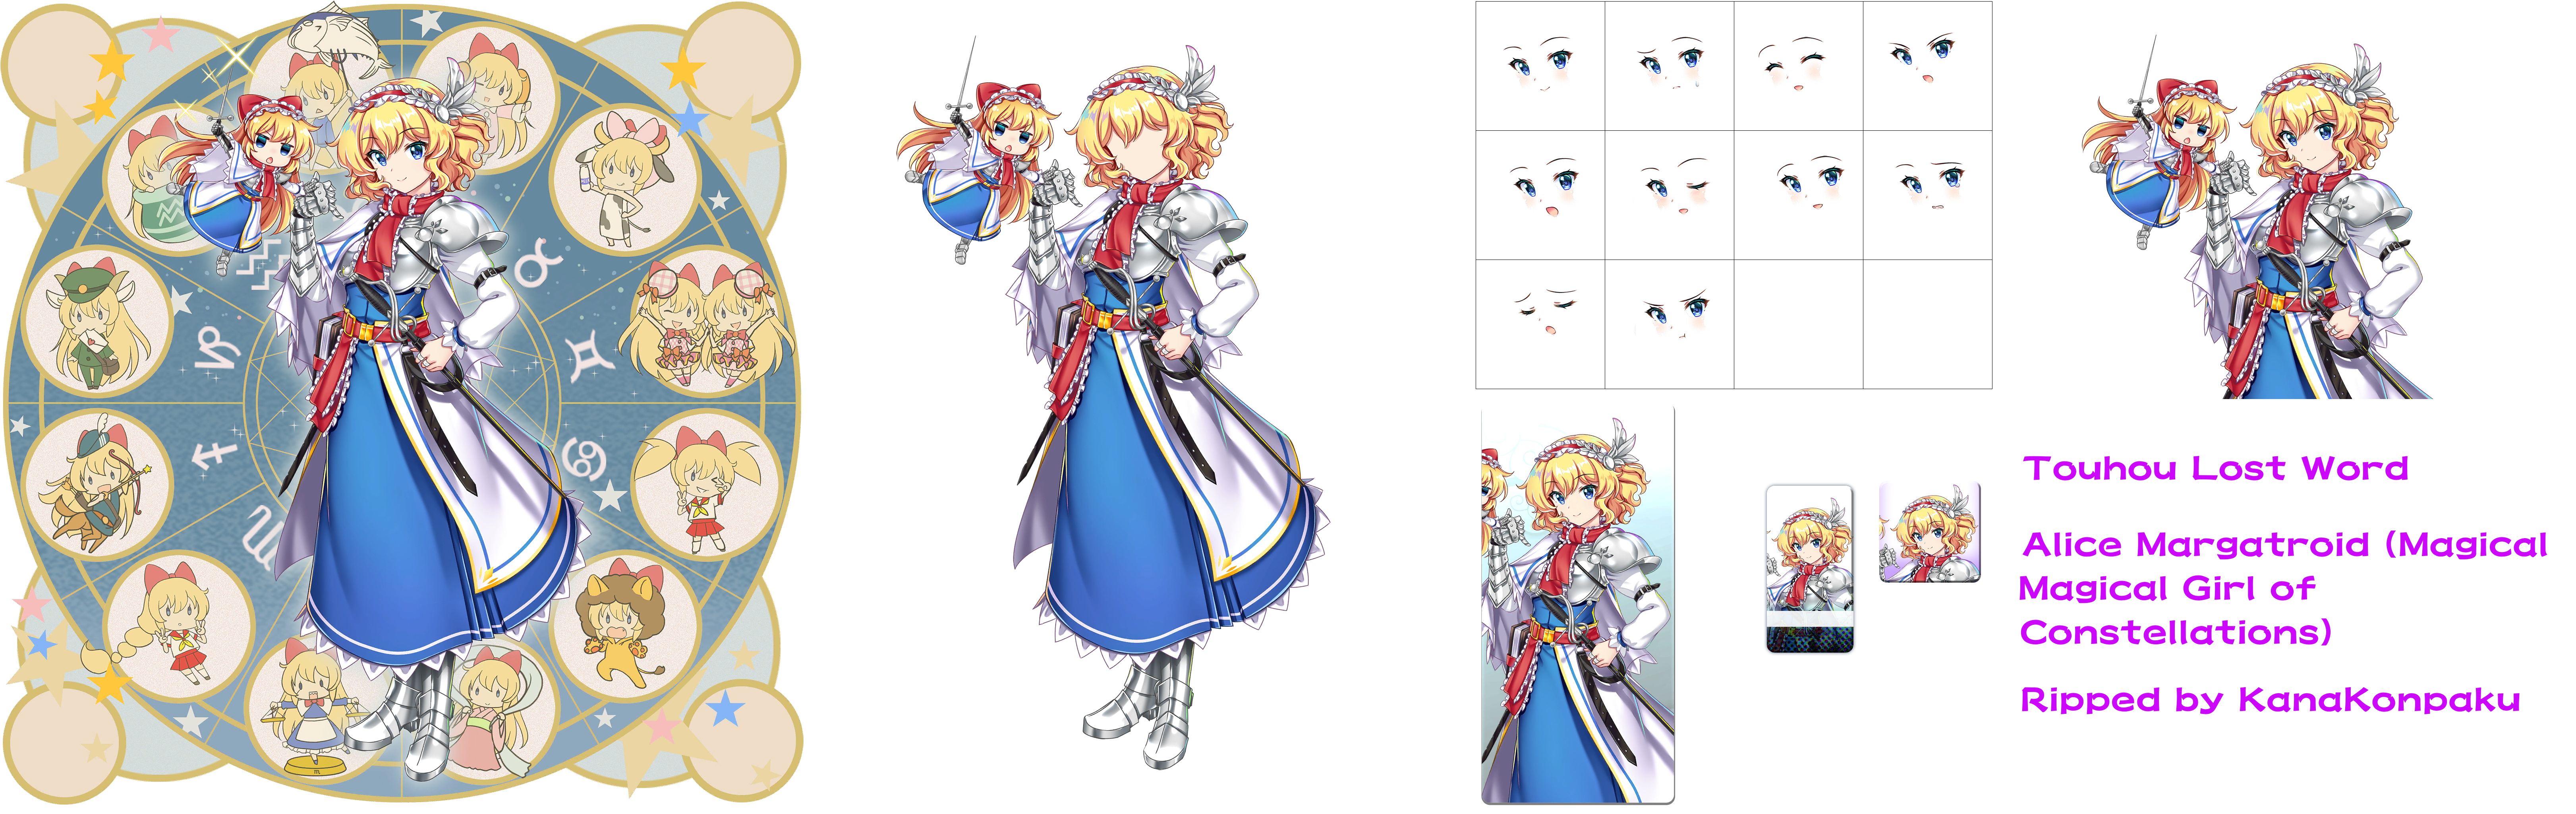 Touhou LostWord - Alice Margatroid (Magical Girl of Constellations)